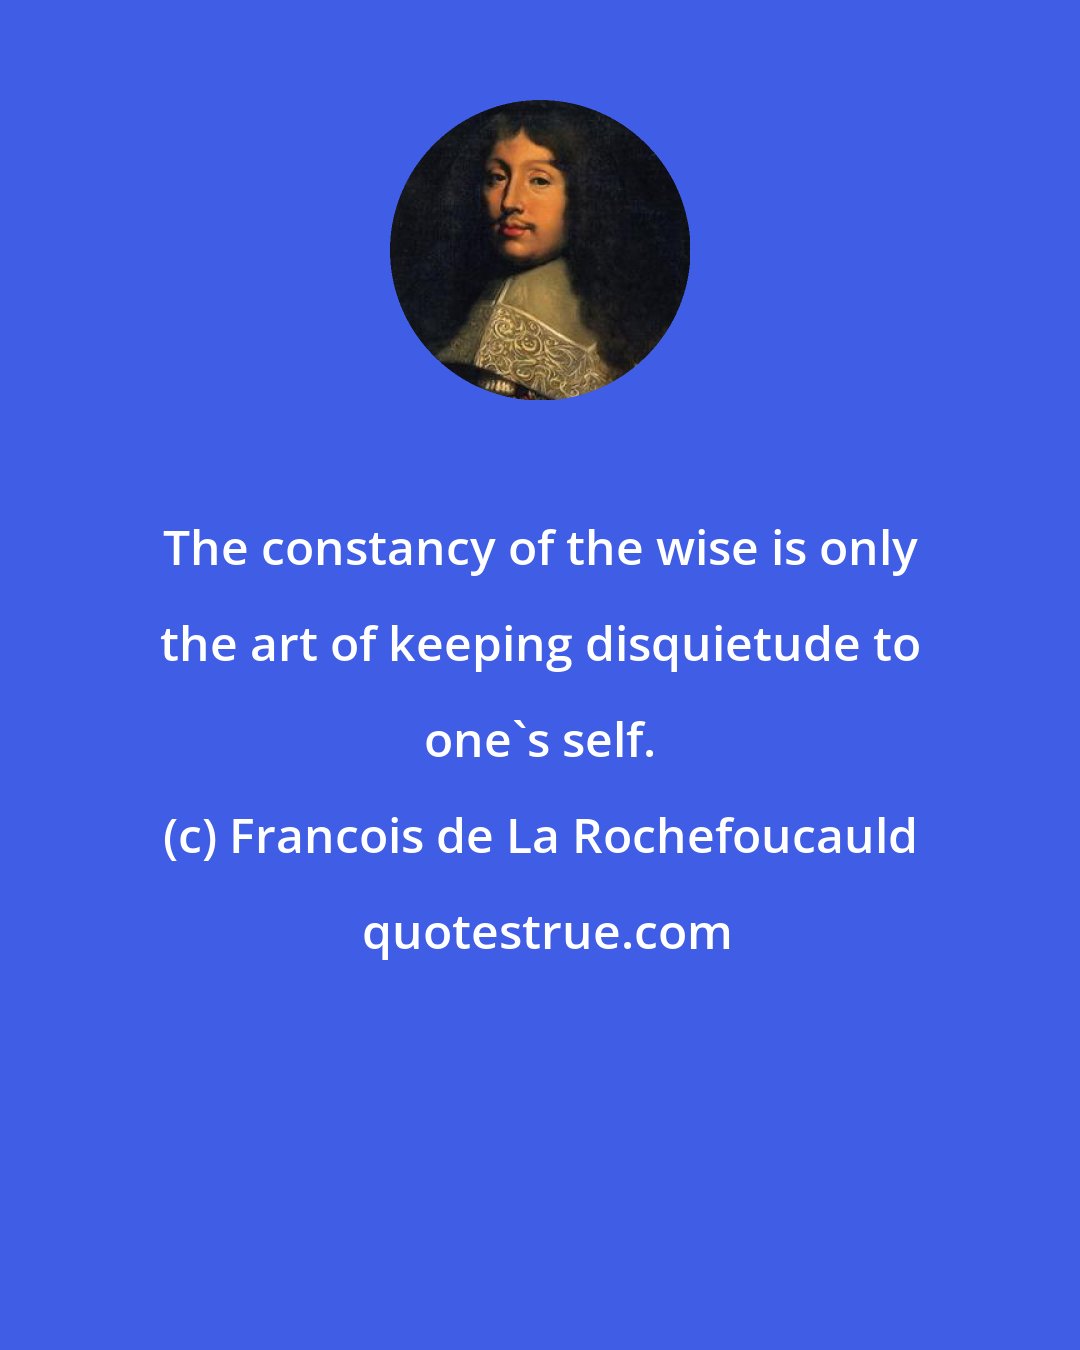 Francois de La Rochefoucauld: The constancy of the wise is only the art of keeping disquietude to one's self.